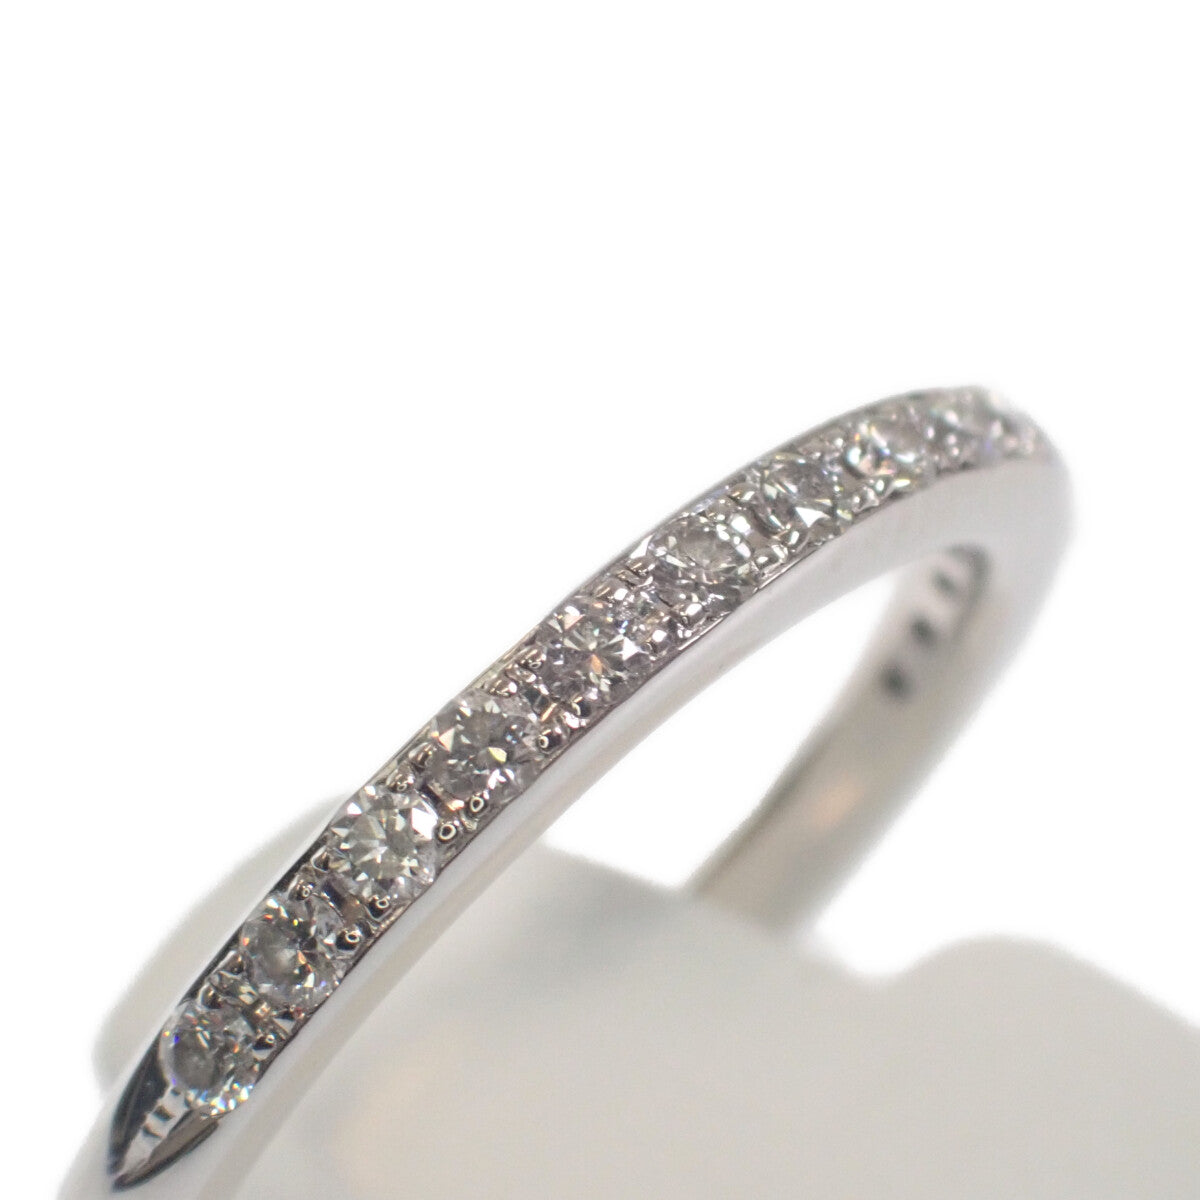 [LuxUness]  Half Eternity Design Ring in PT900 Platinum with 0.21Ct Diamonds, Size 10 - Silver, for Women- Classic and Elegant- (Pre-owned) in Excellent condition